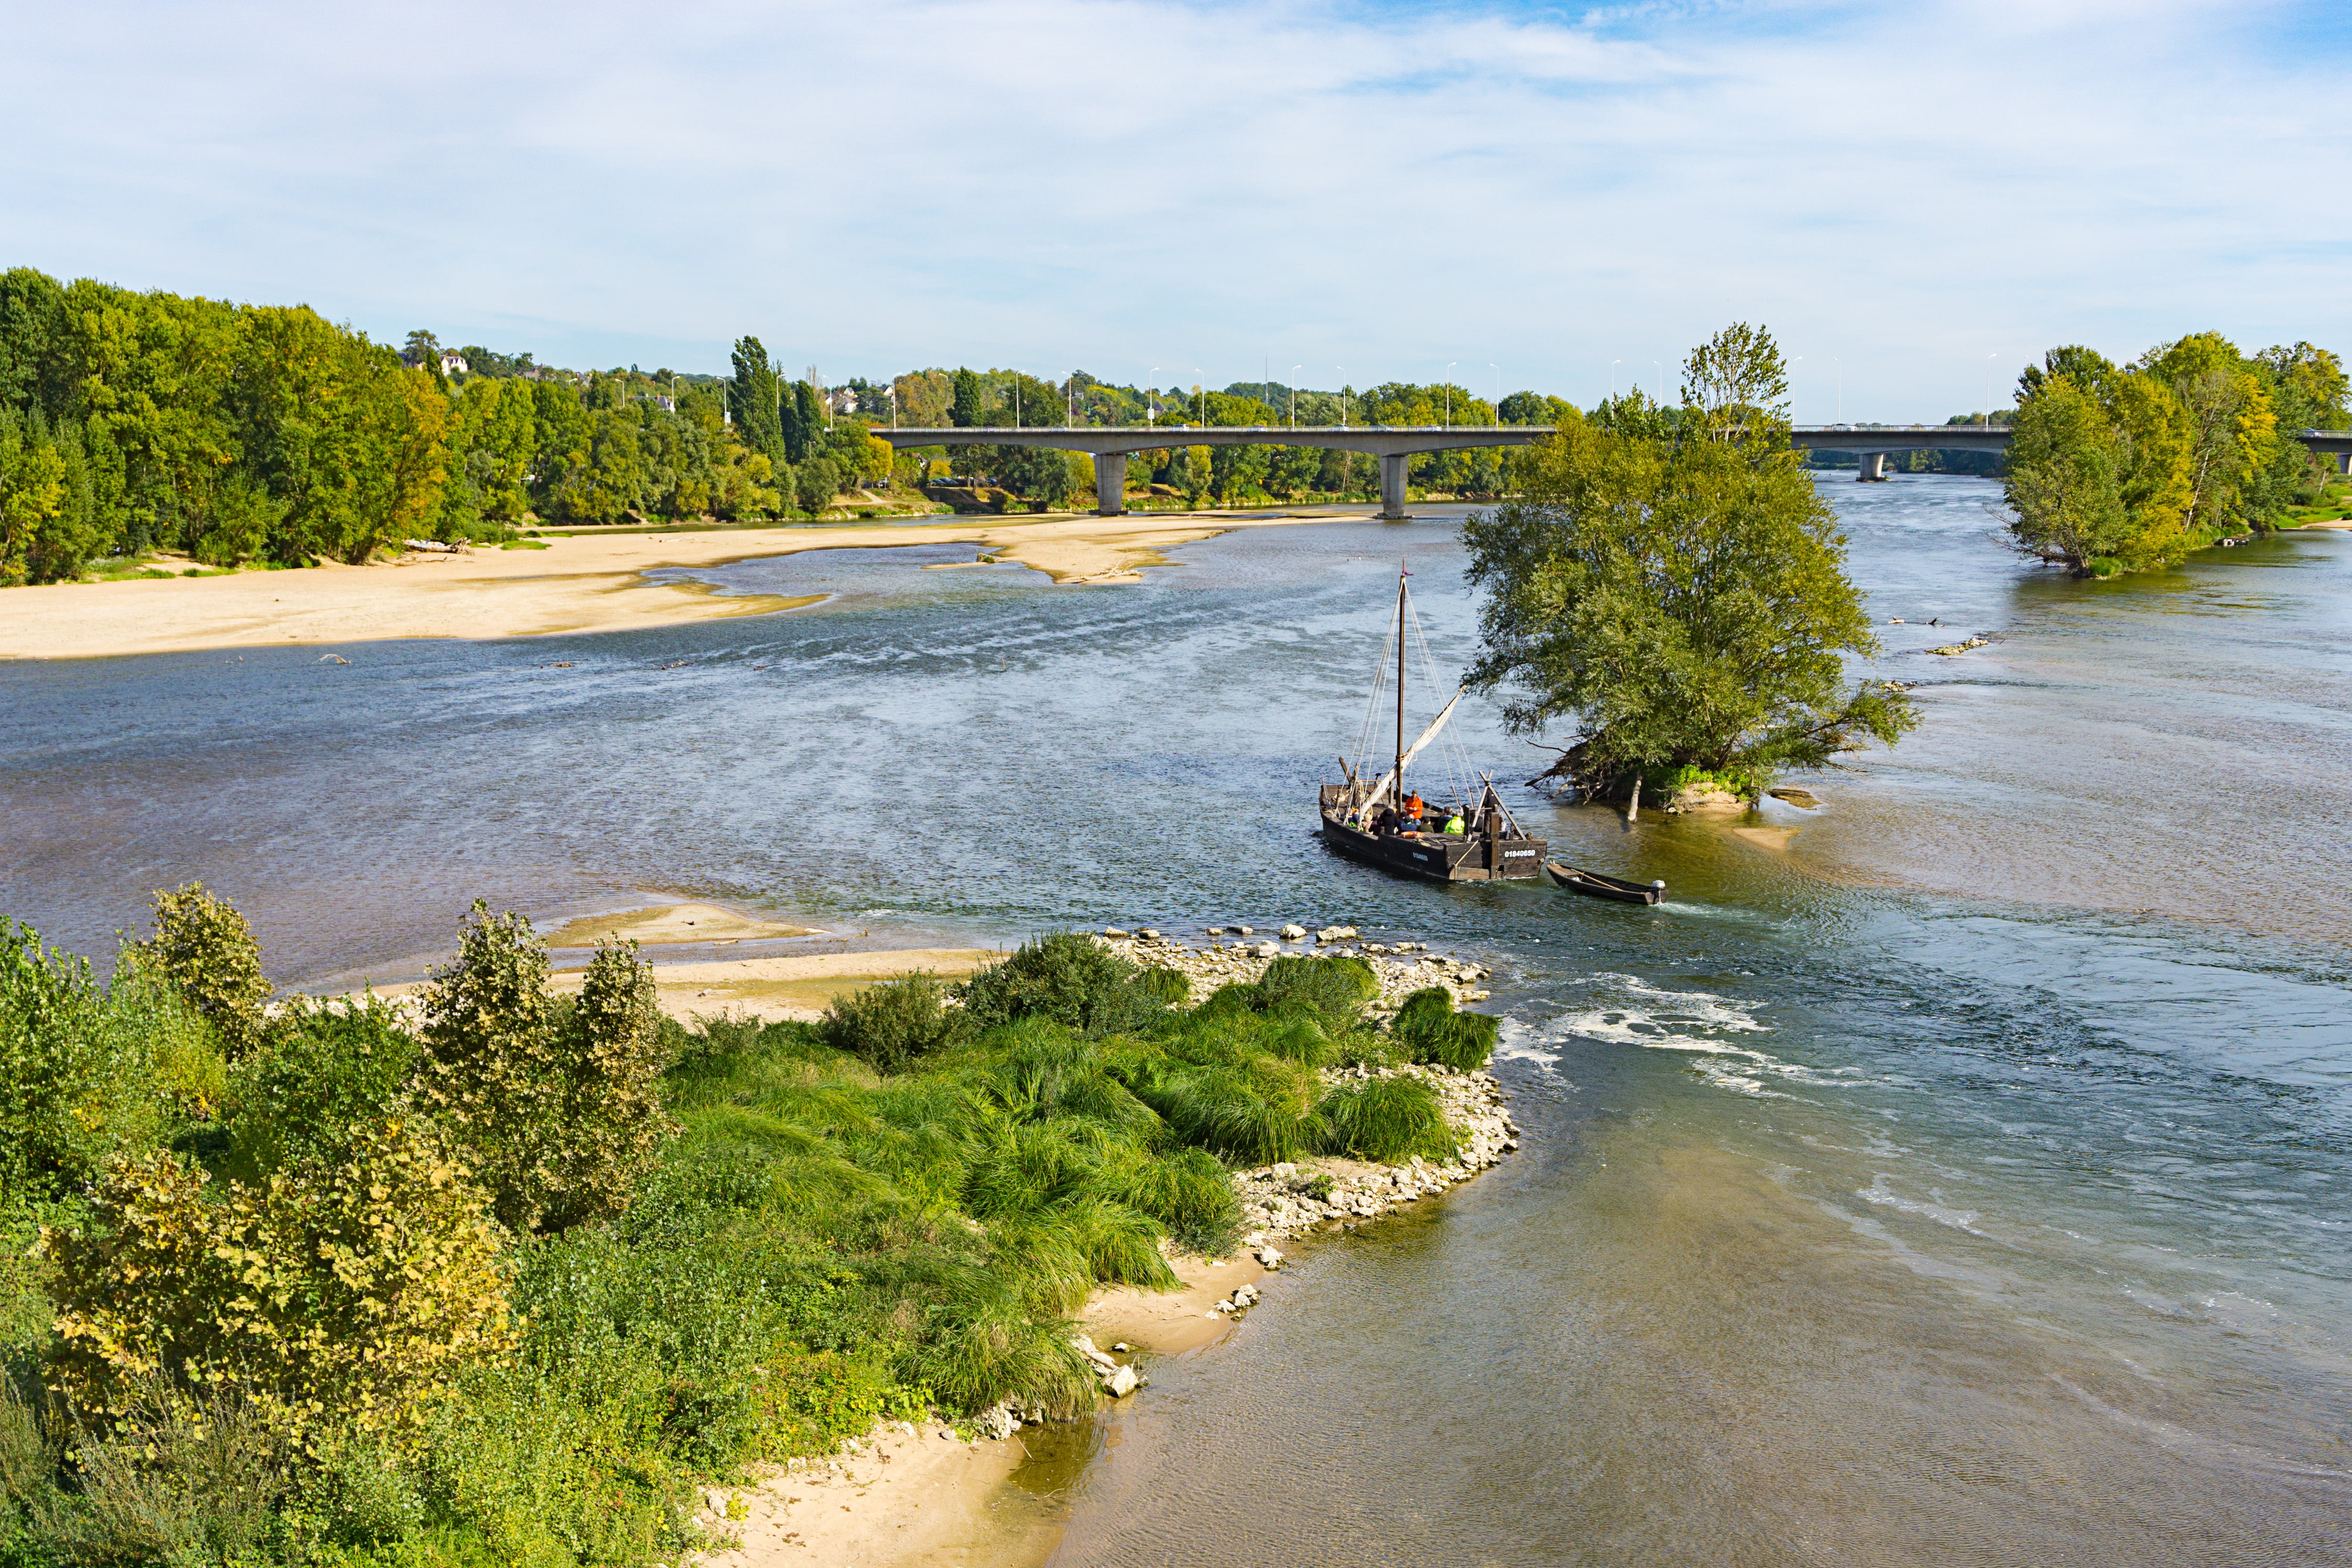 green leafed trees, loire, france tours, river, sandbar, water